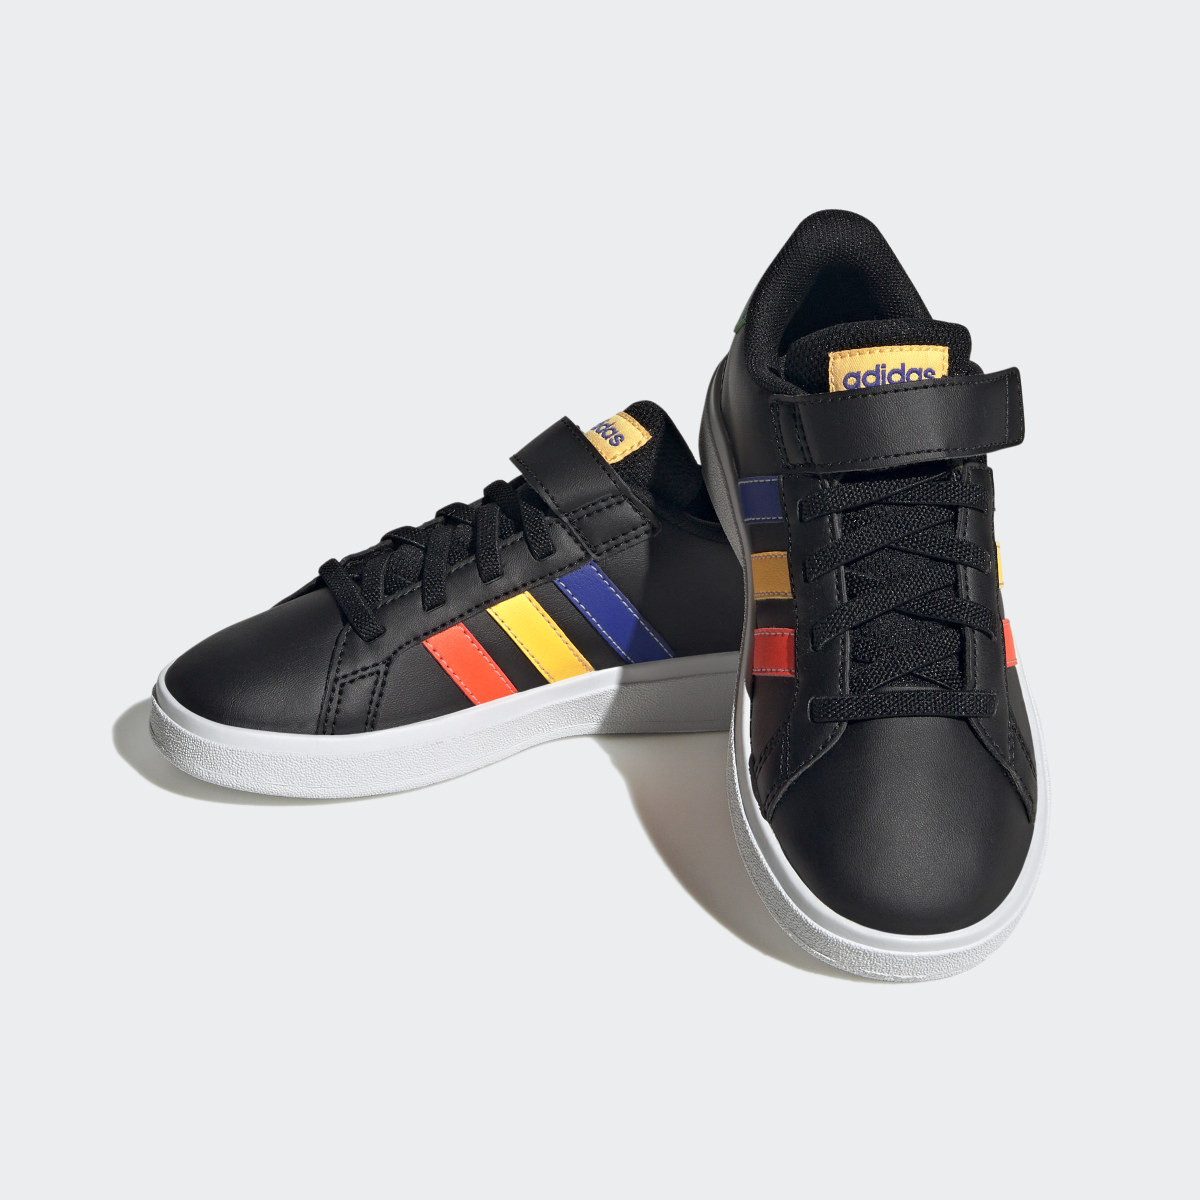 Adidas Grand Court Elastic Lace and Top Strap Shoes. 5